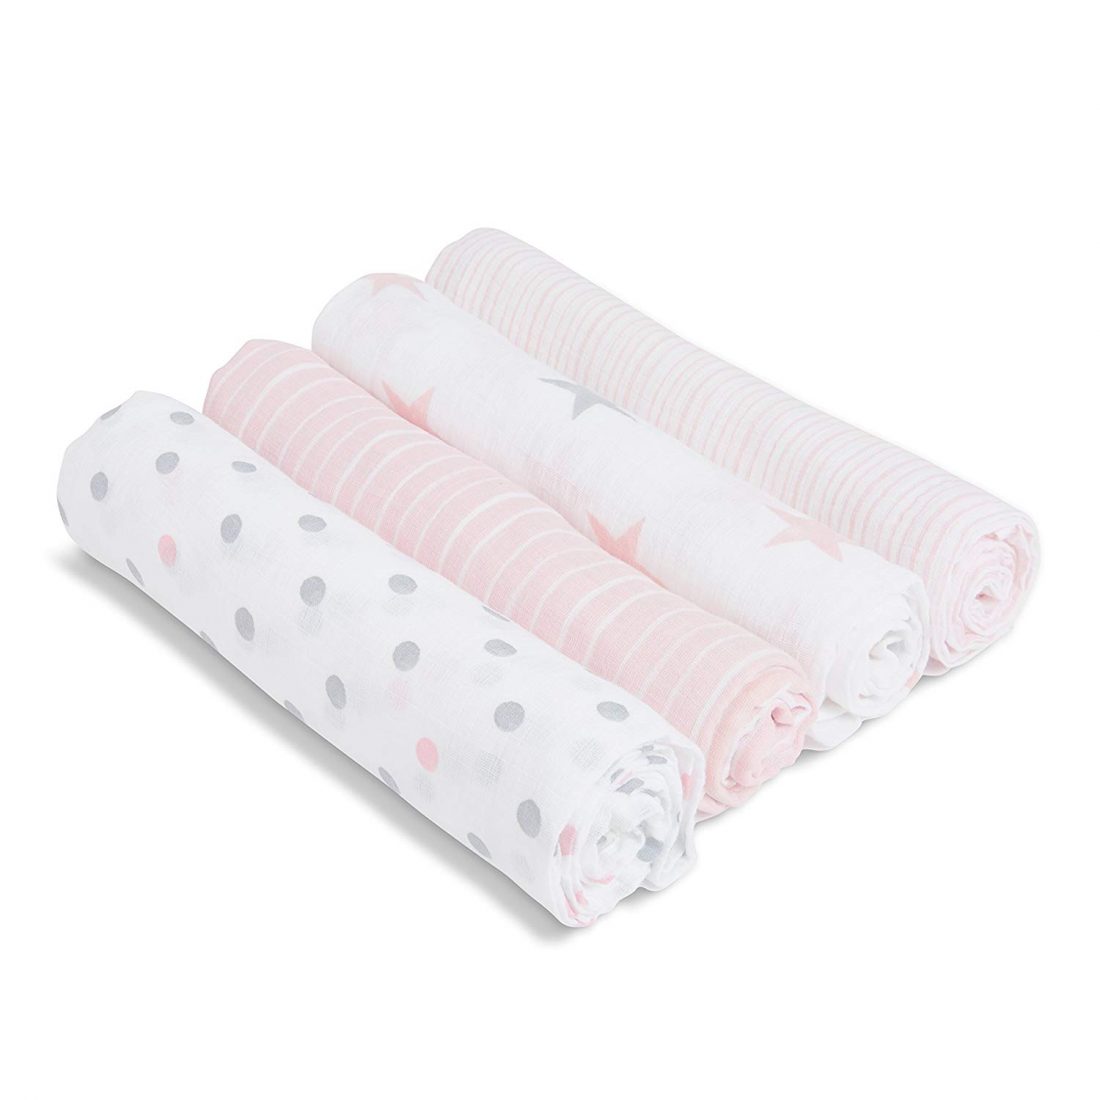 Newborn & Toddler Gift aden 112x112cm Unisex Infant Shower Items anais essentials 100% Cotton Muslin Swaddle & Receiving Blanket for Baby Girls & Boys Wearable Swaddling Wrap natural history 